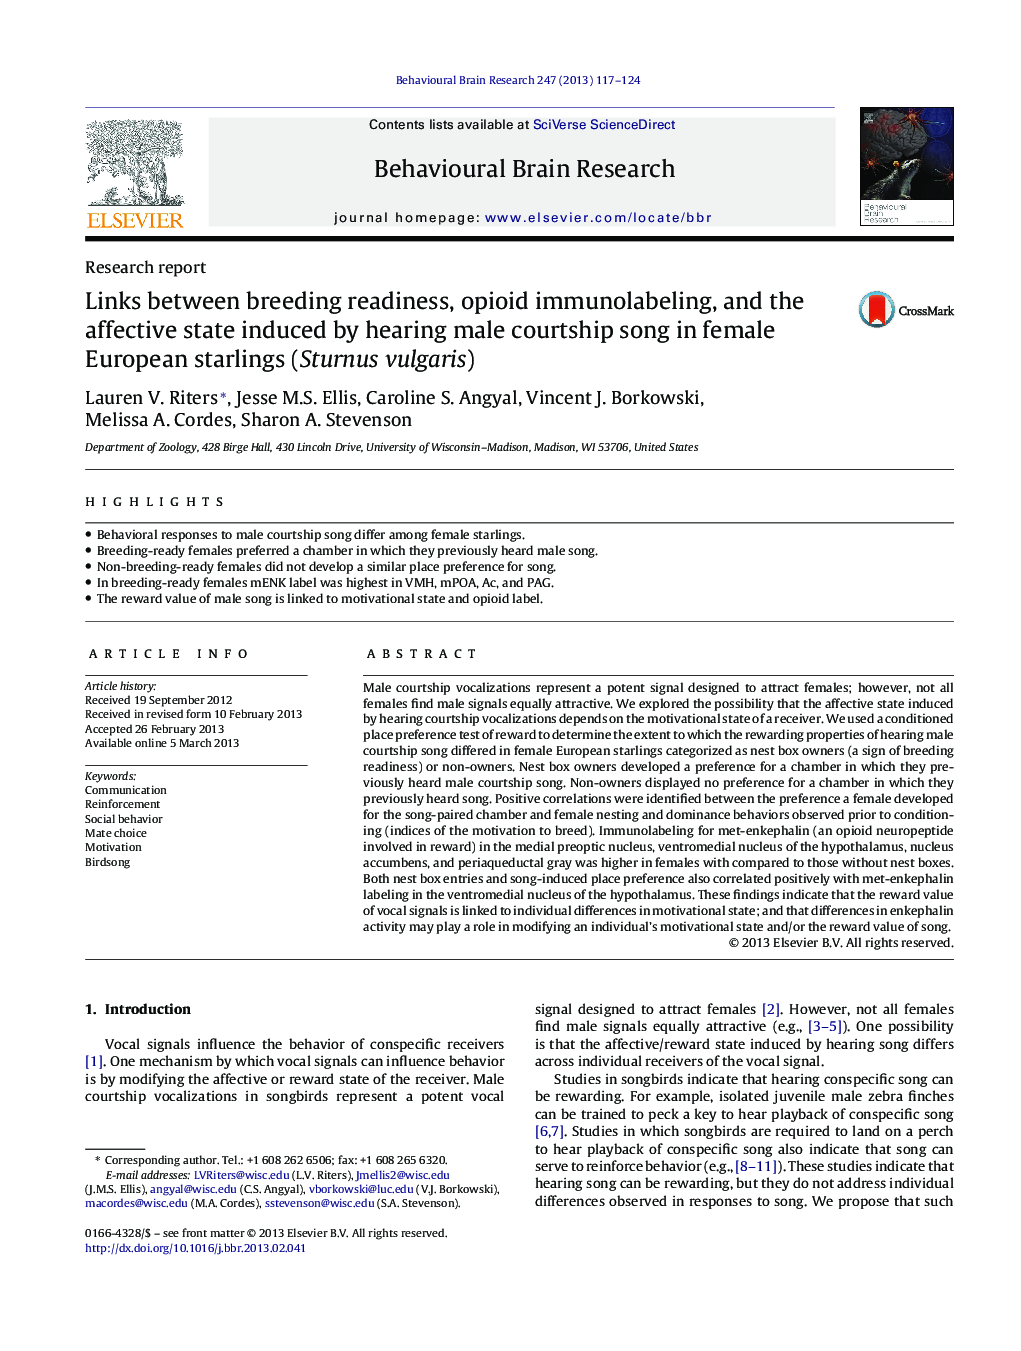 Links between breeding readiness, opioid immunolabeling, and the affective state induced by hearing male courtship song in female European starlings (Sturnus vulgaris)